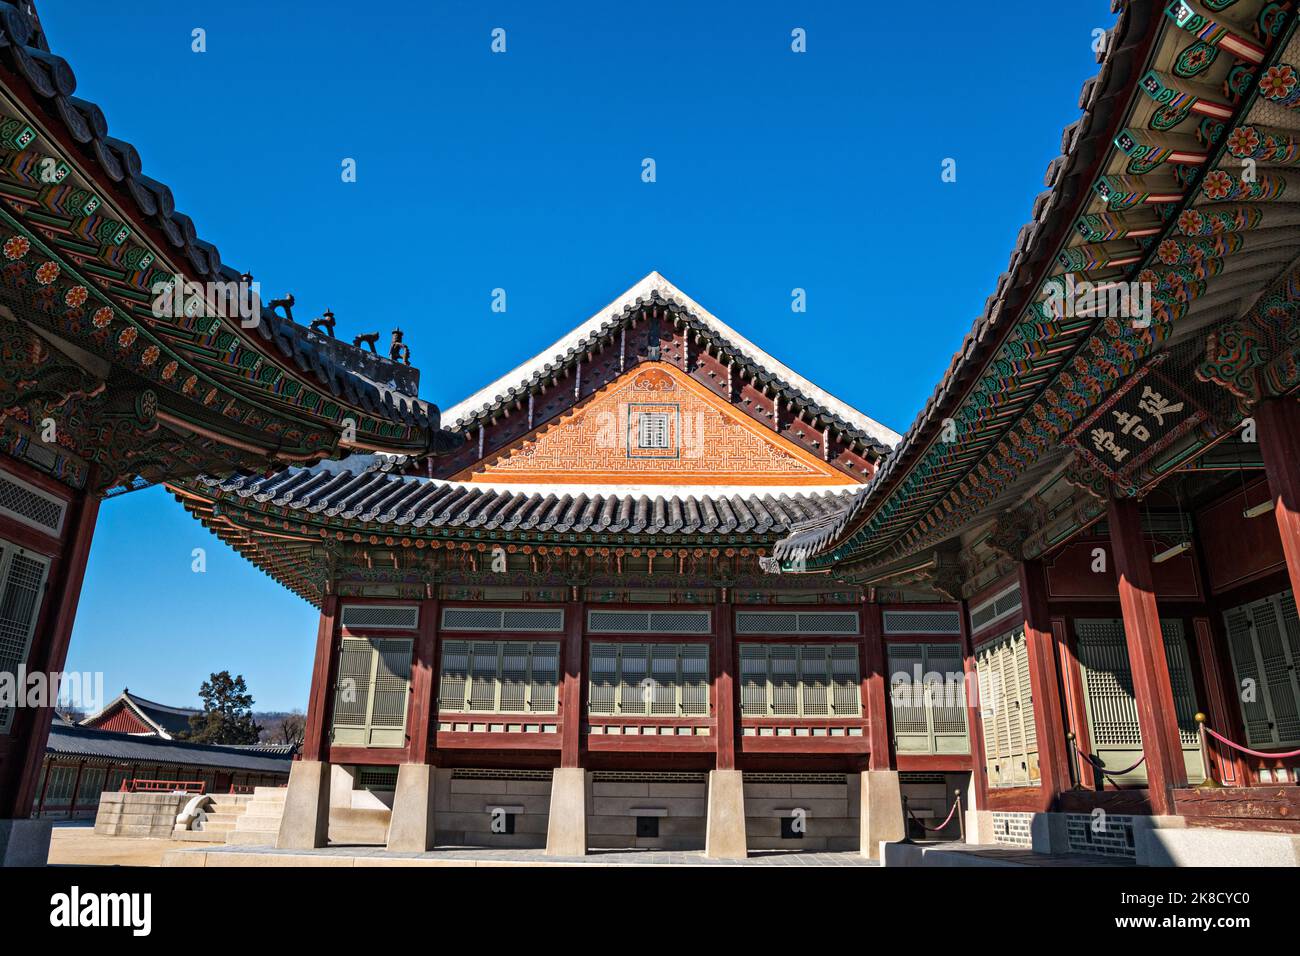 Traditional Korean architecture in the Gangnyeong-jeon or Kings Residence Hall complex, at the Gyeongbokgung Palace during winter in Seoul, South Korea. Stock Photo